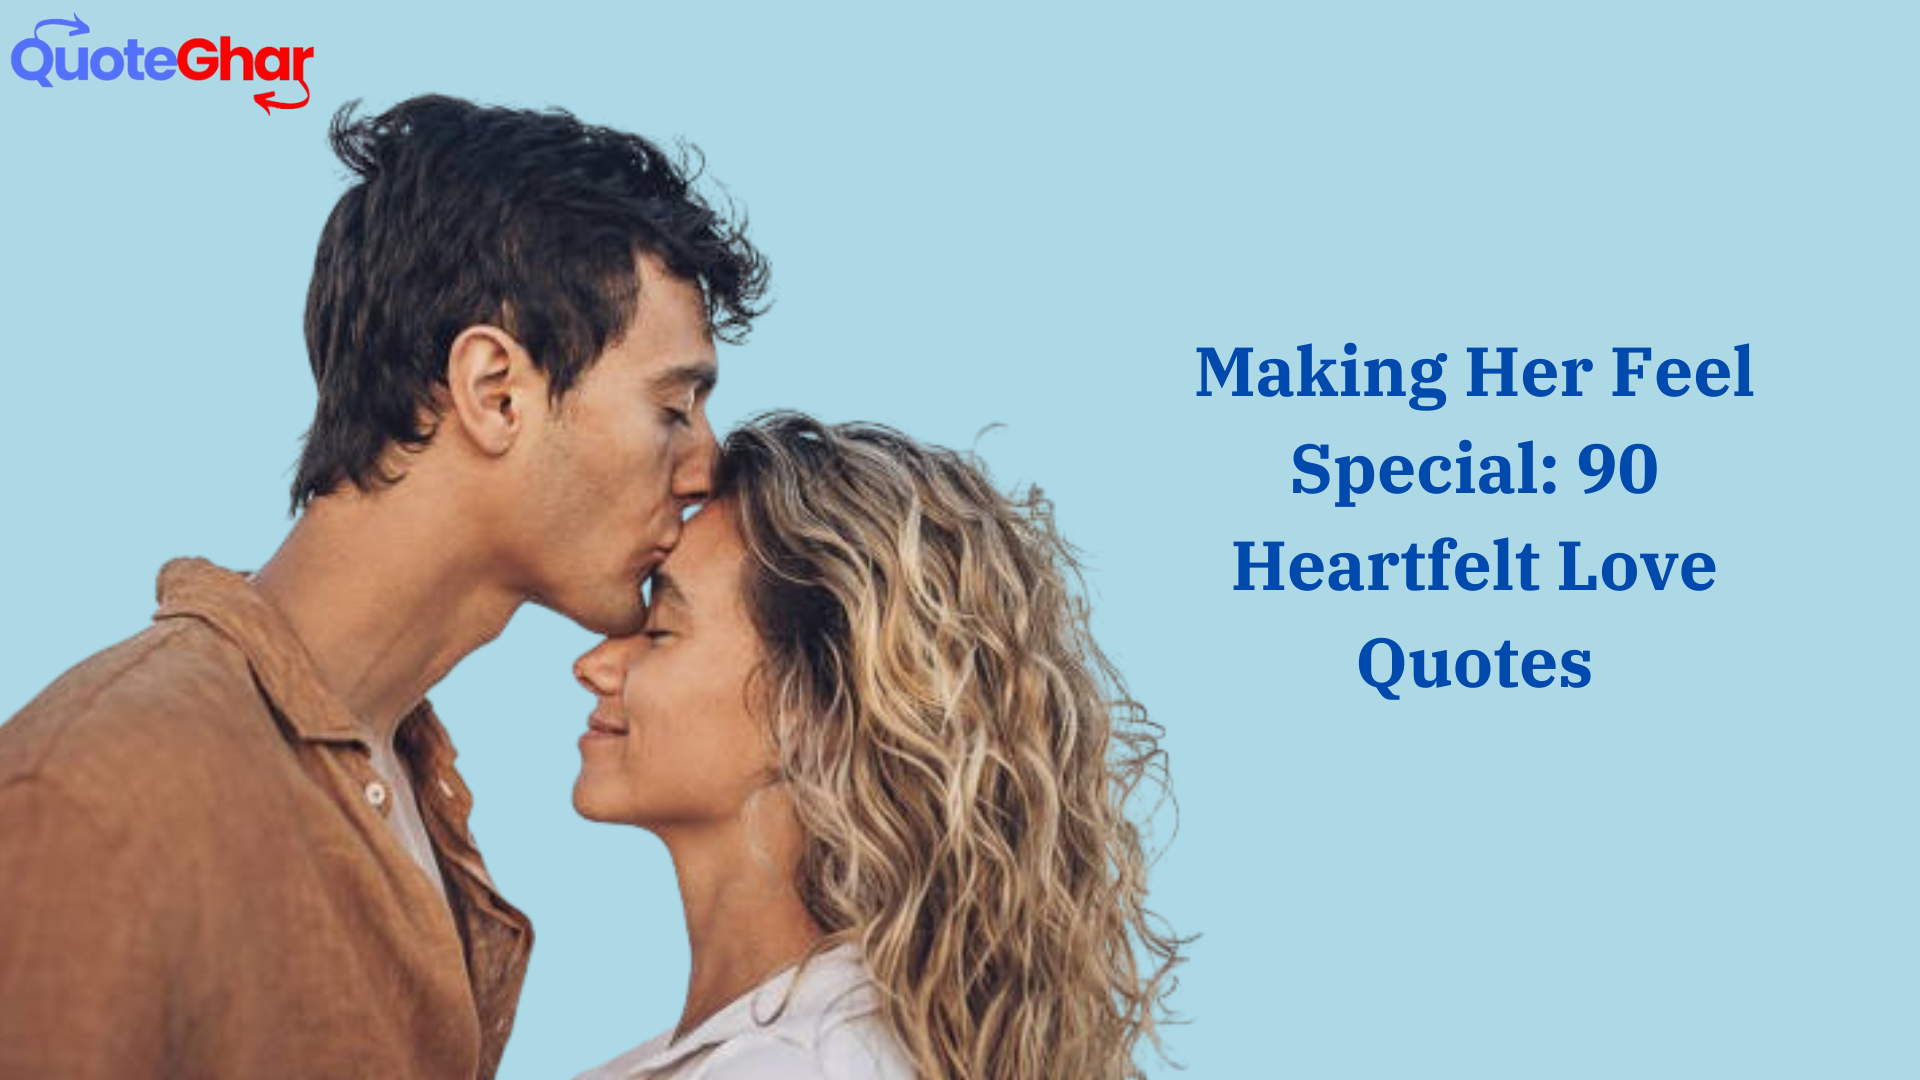 Making Her Feel Special: 90 Heartfelt Love Quotes